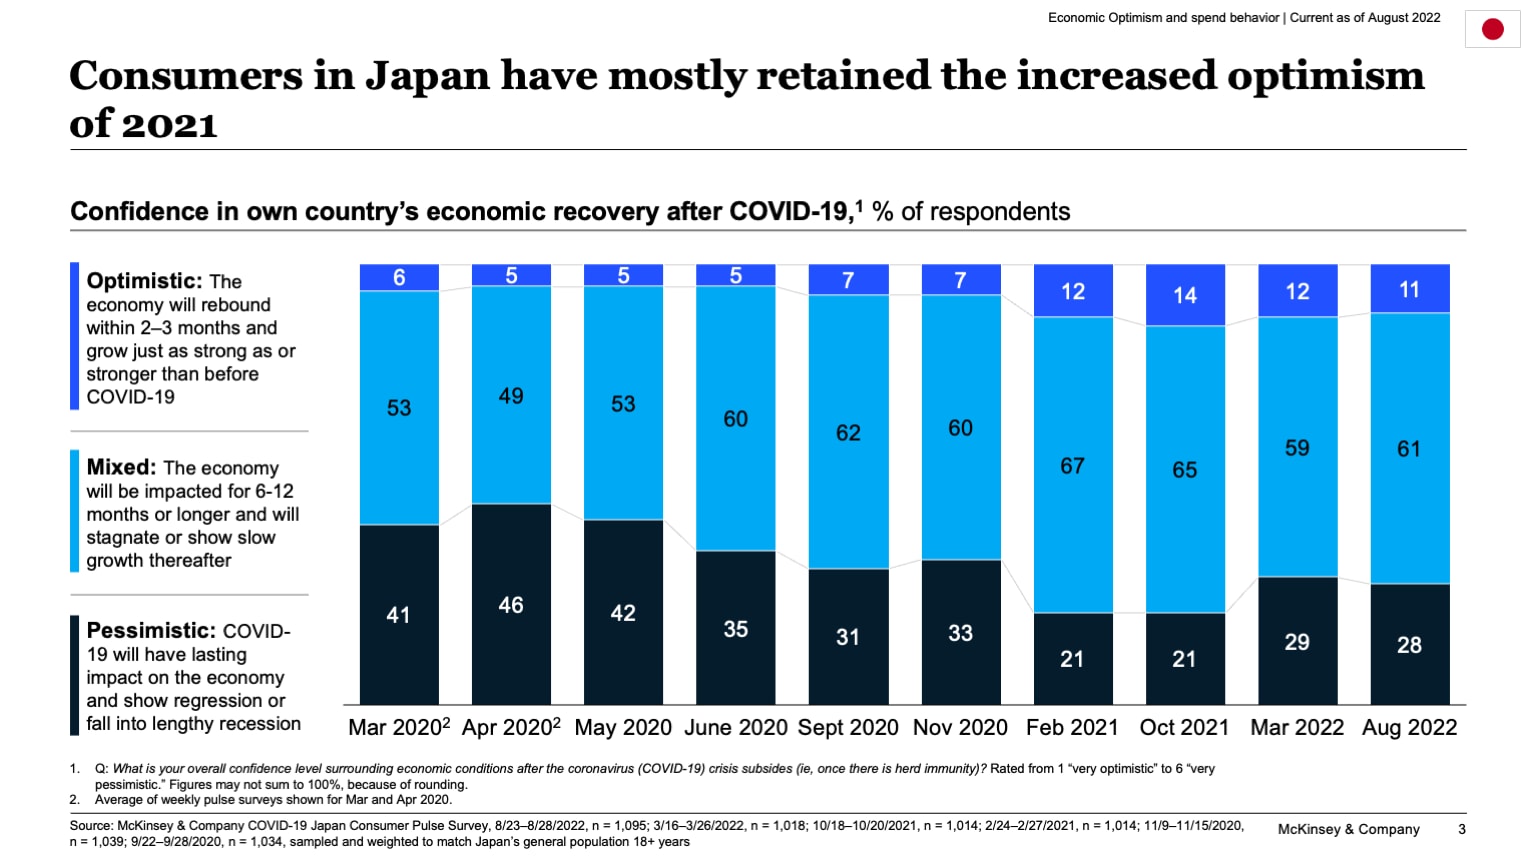 Consumers in Japan have mostly retained the increased optimism of 2021